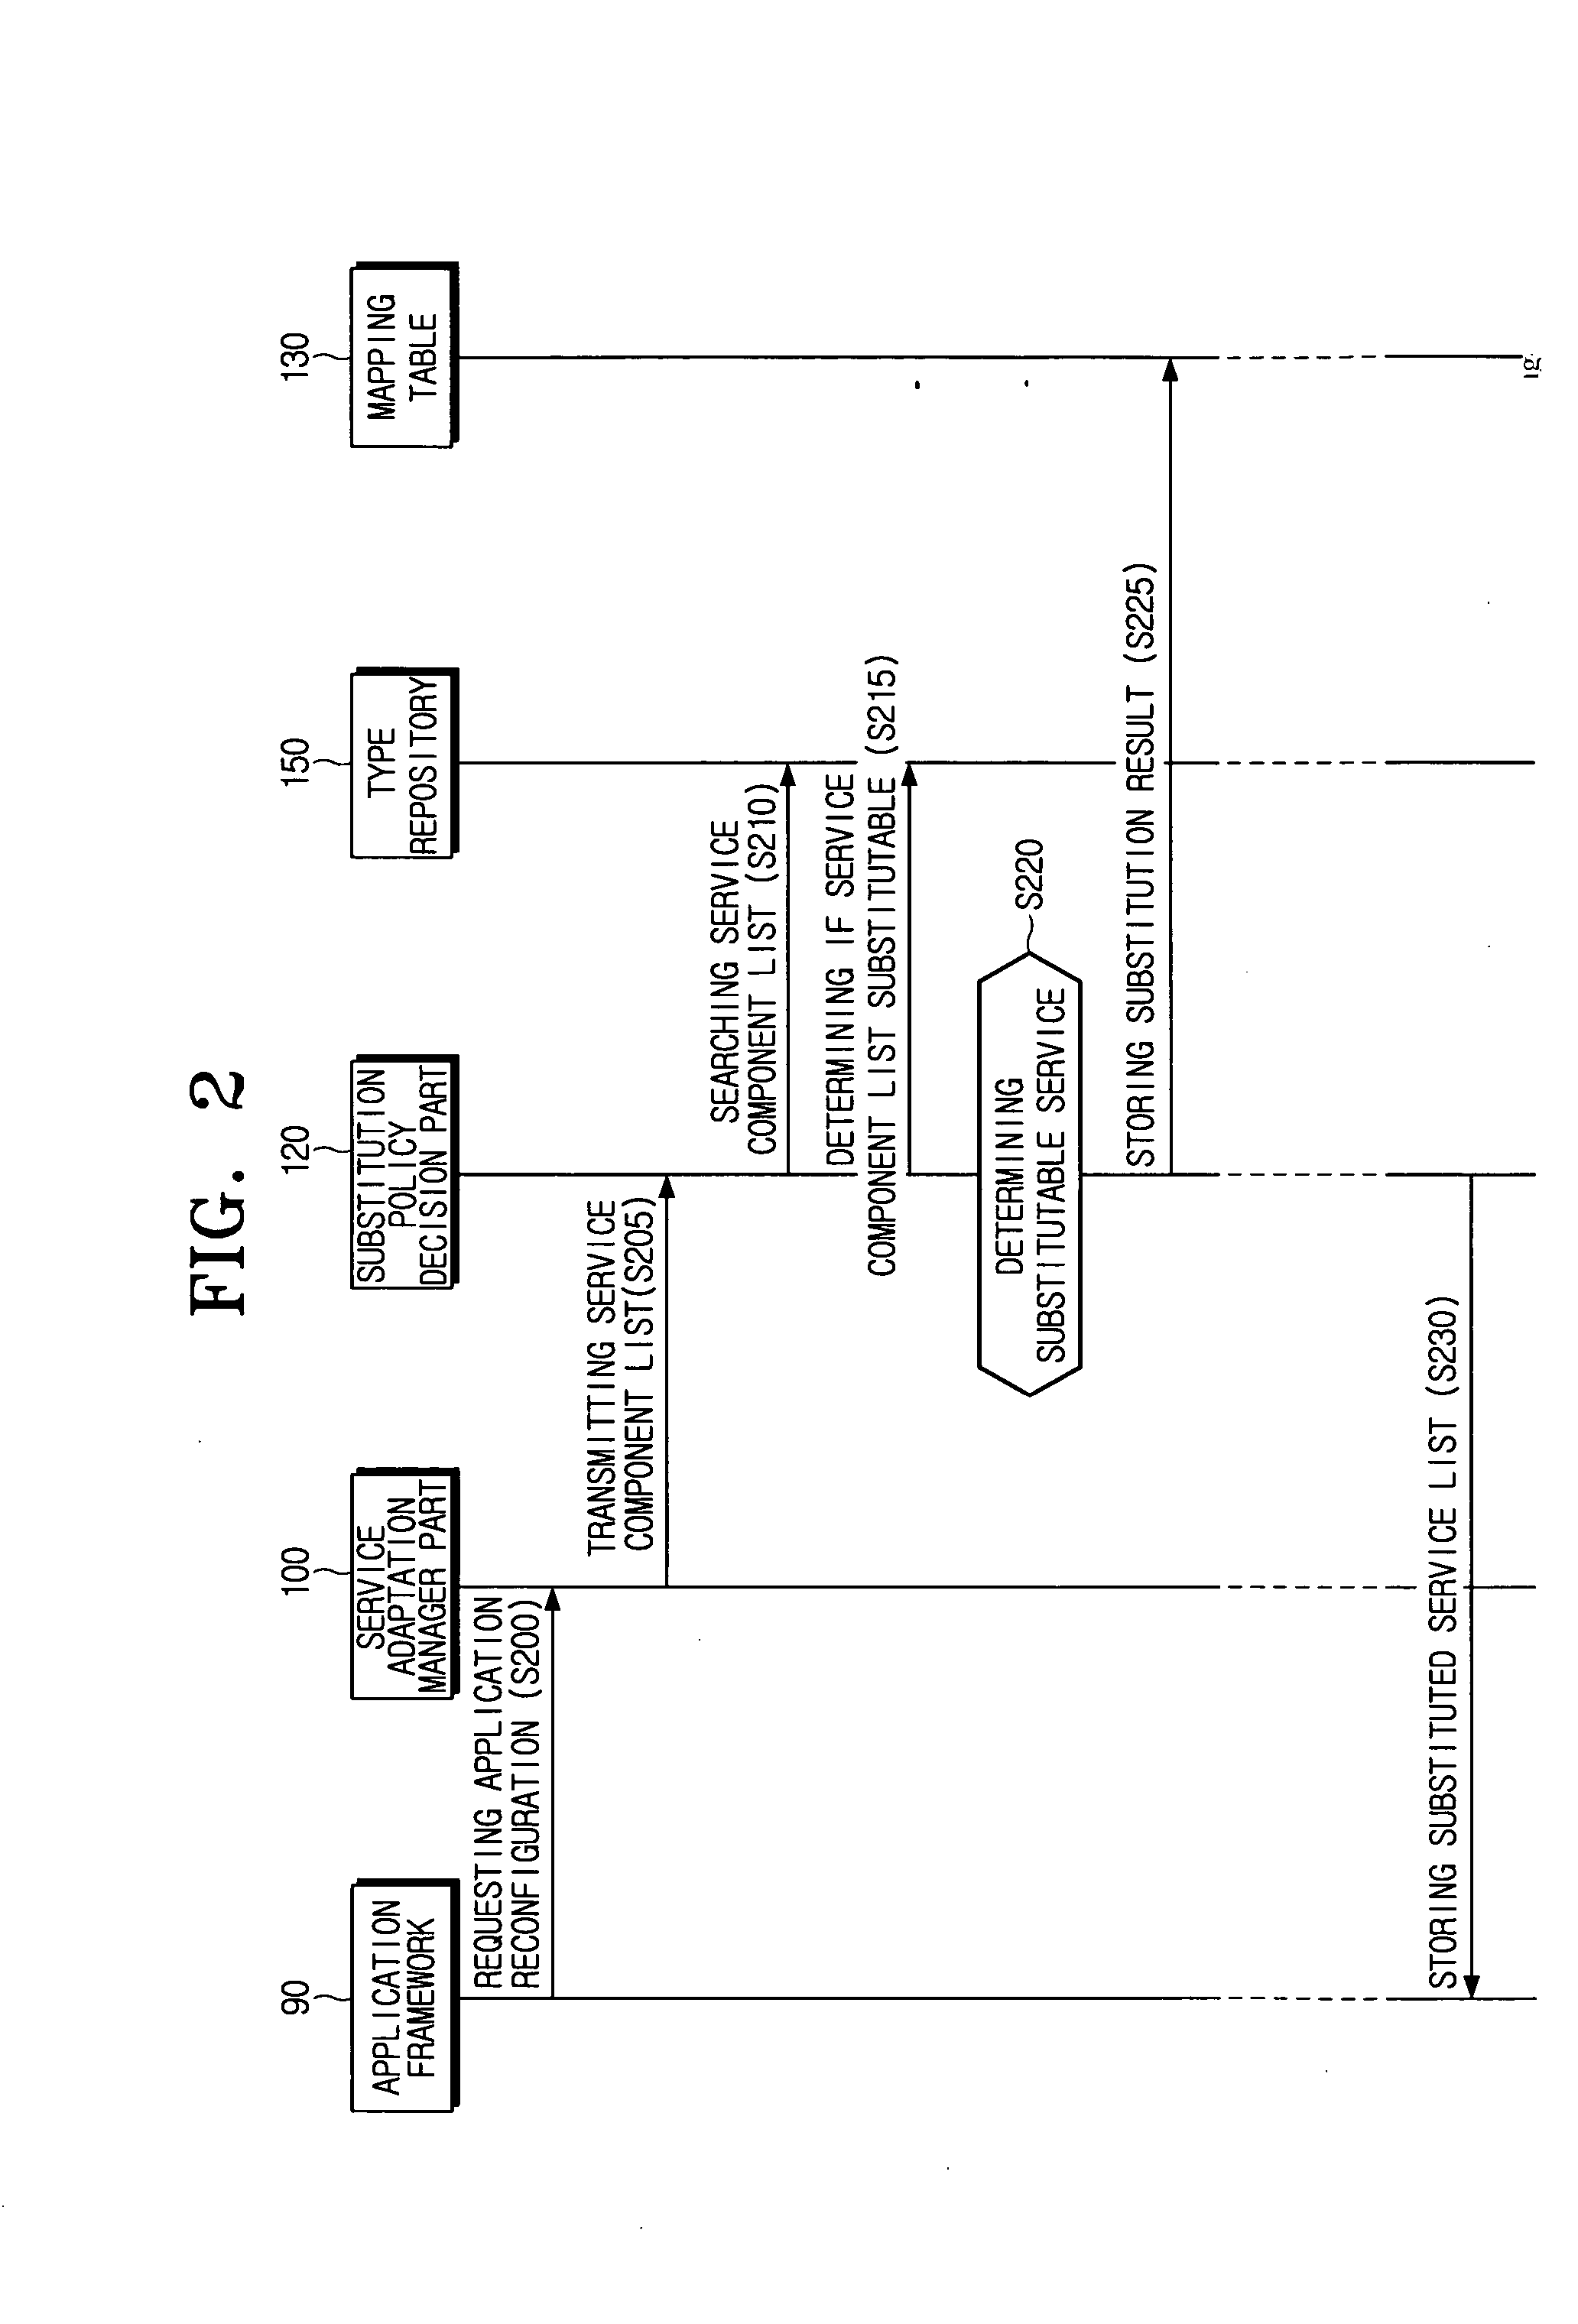 Method for reconfiguring application using subtyping-based flexible service adaptation in pervasive computing environment and system thereof